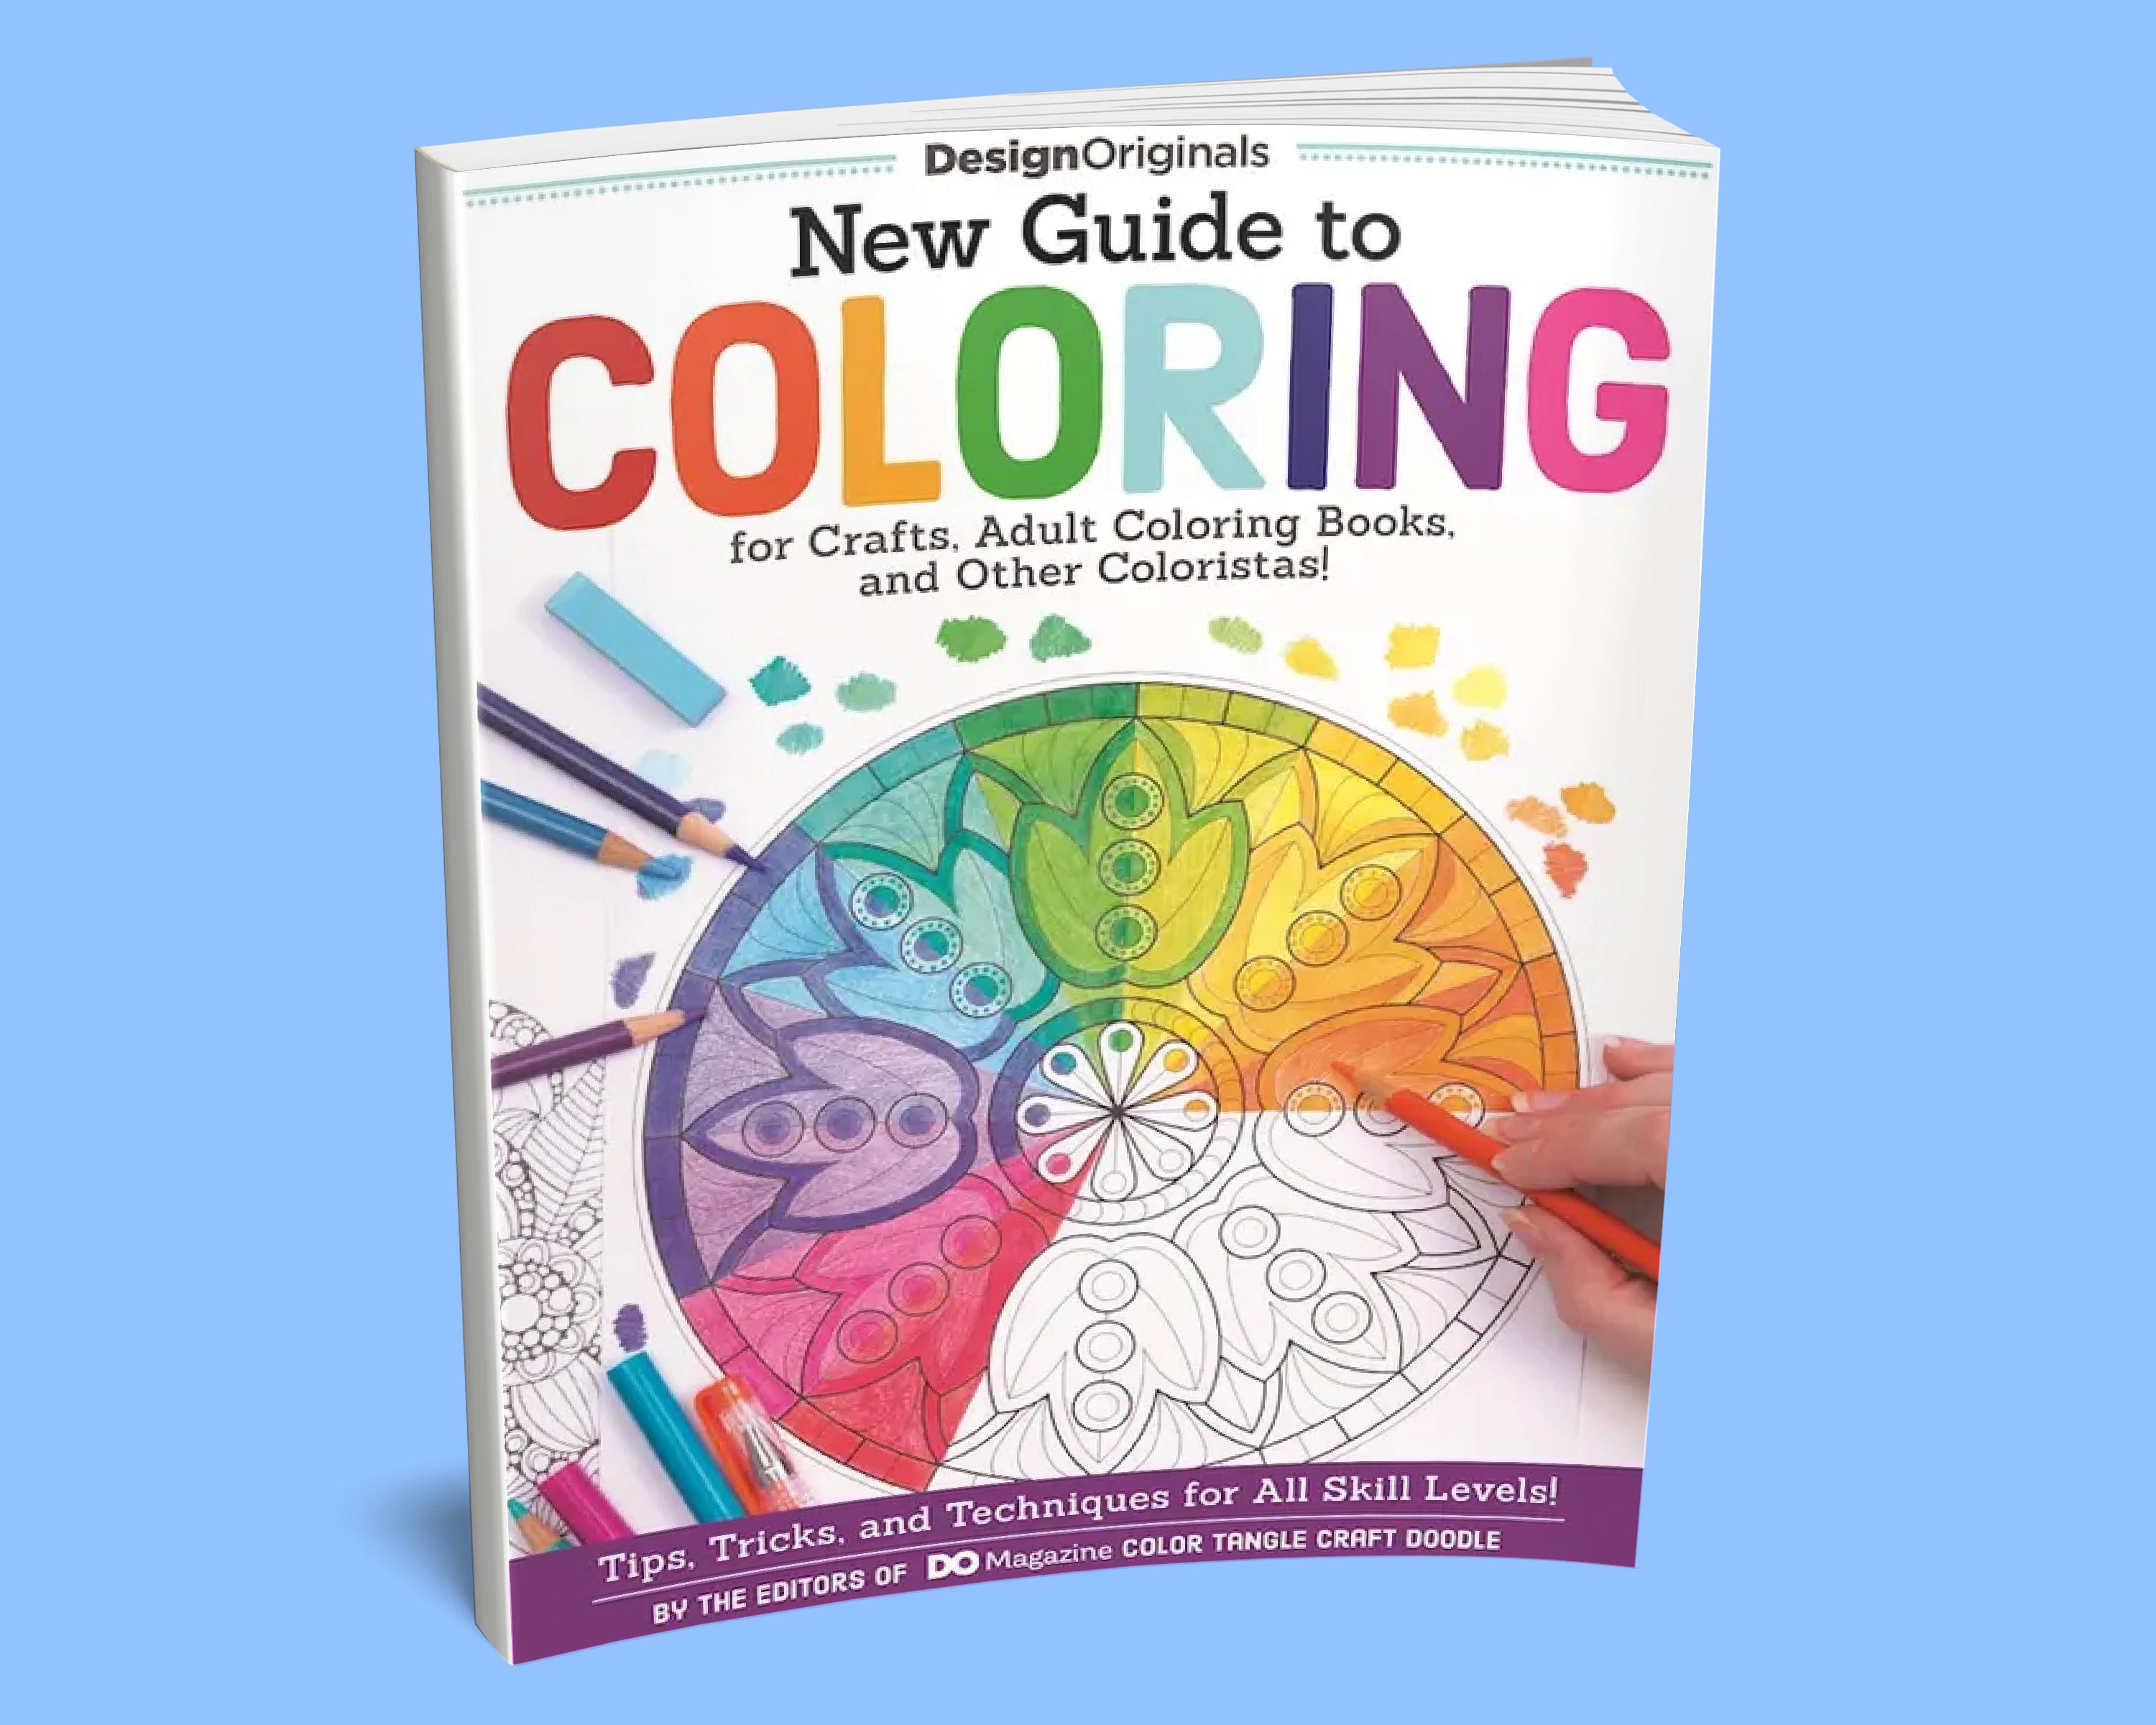 48 Coloring Gel Pens Adult Coloring Books, Drawing, Bible Study